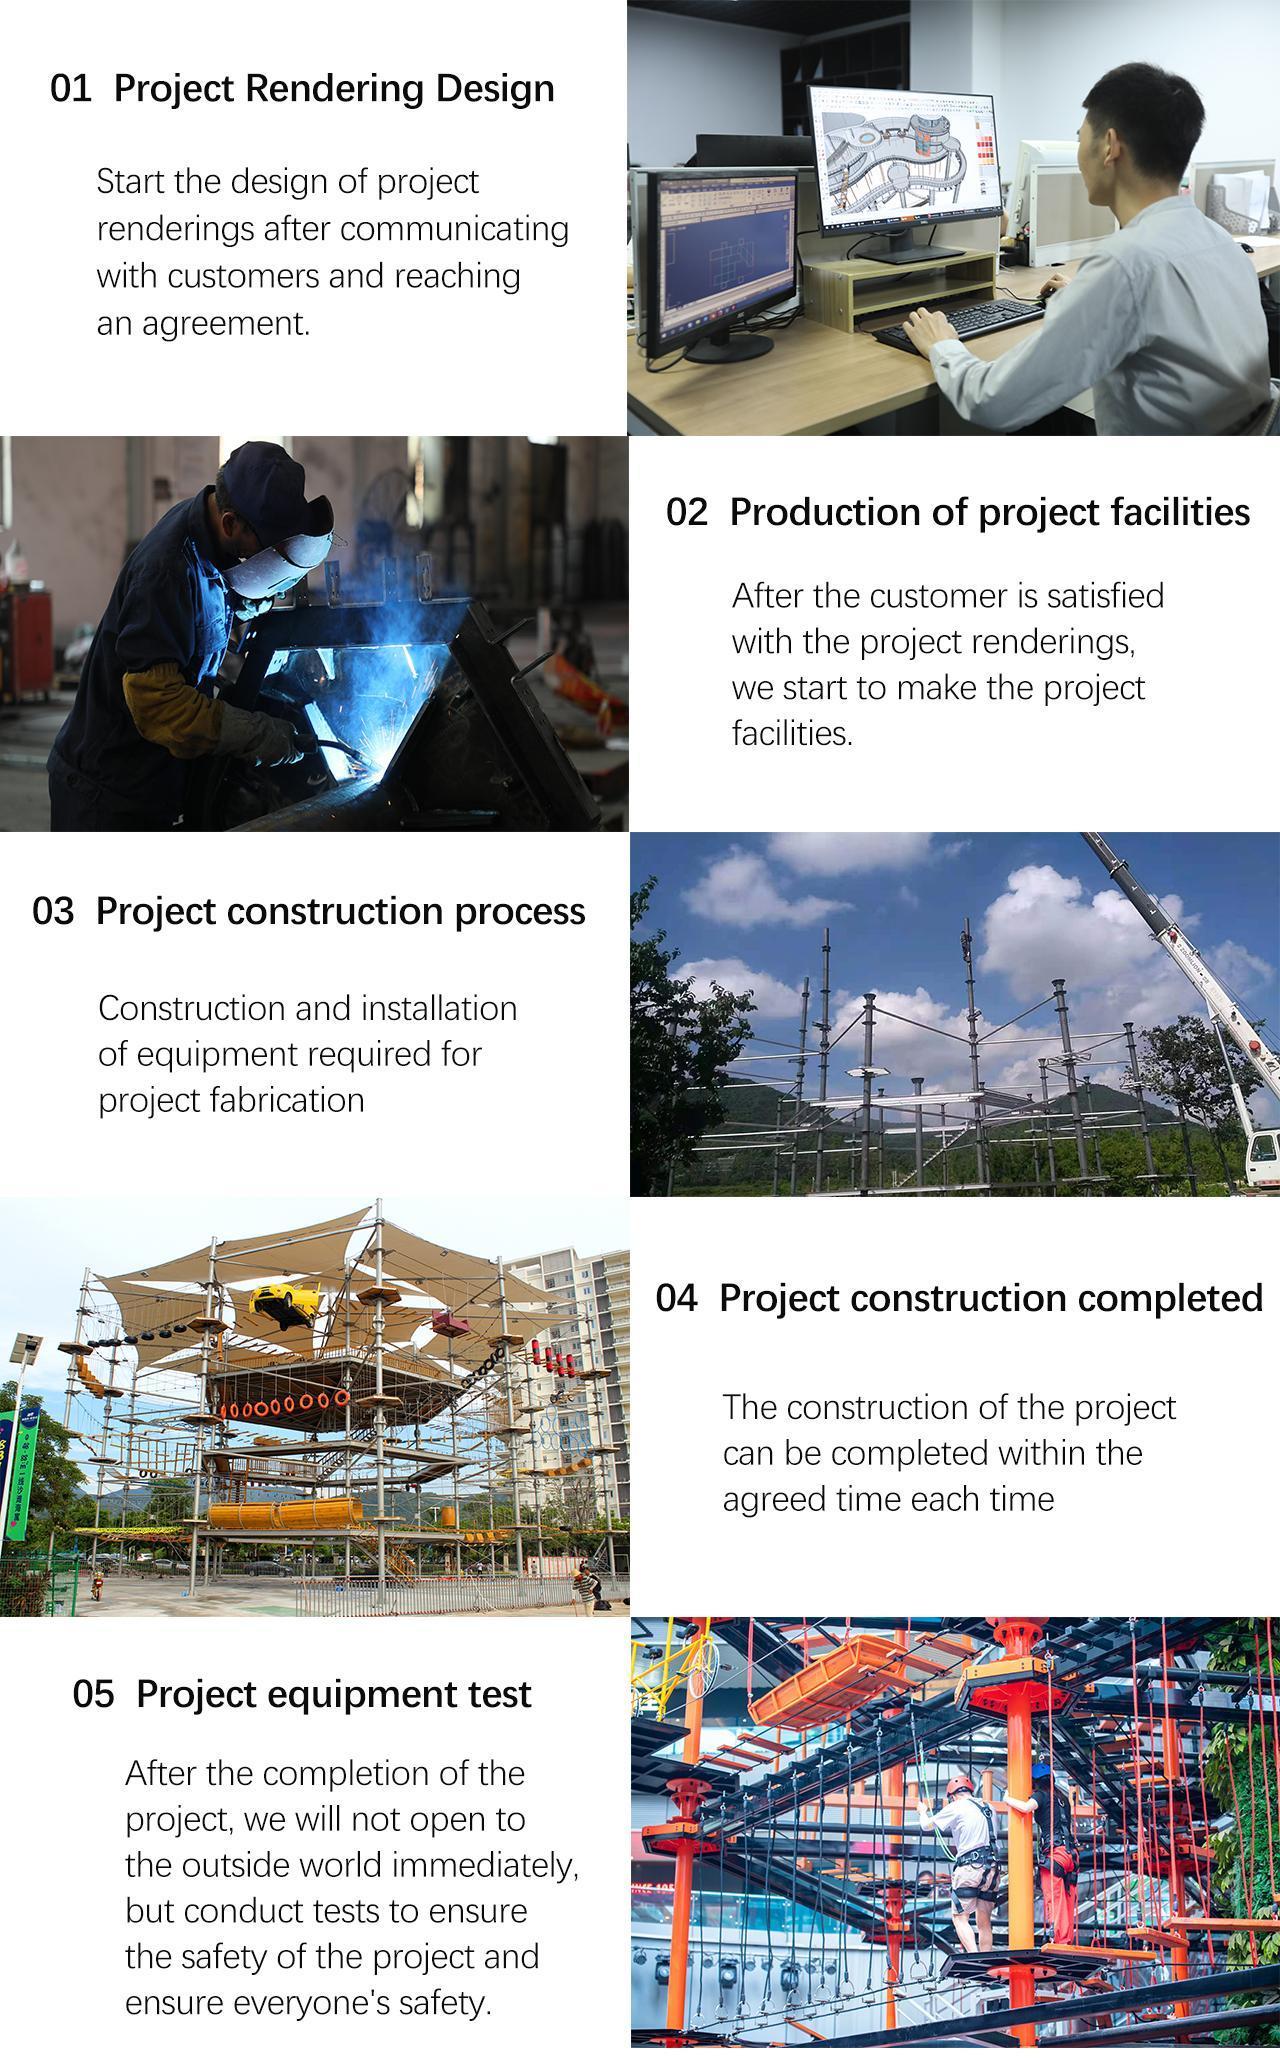 Production process of a project